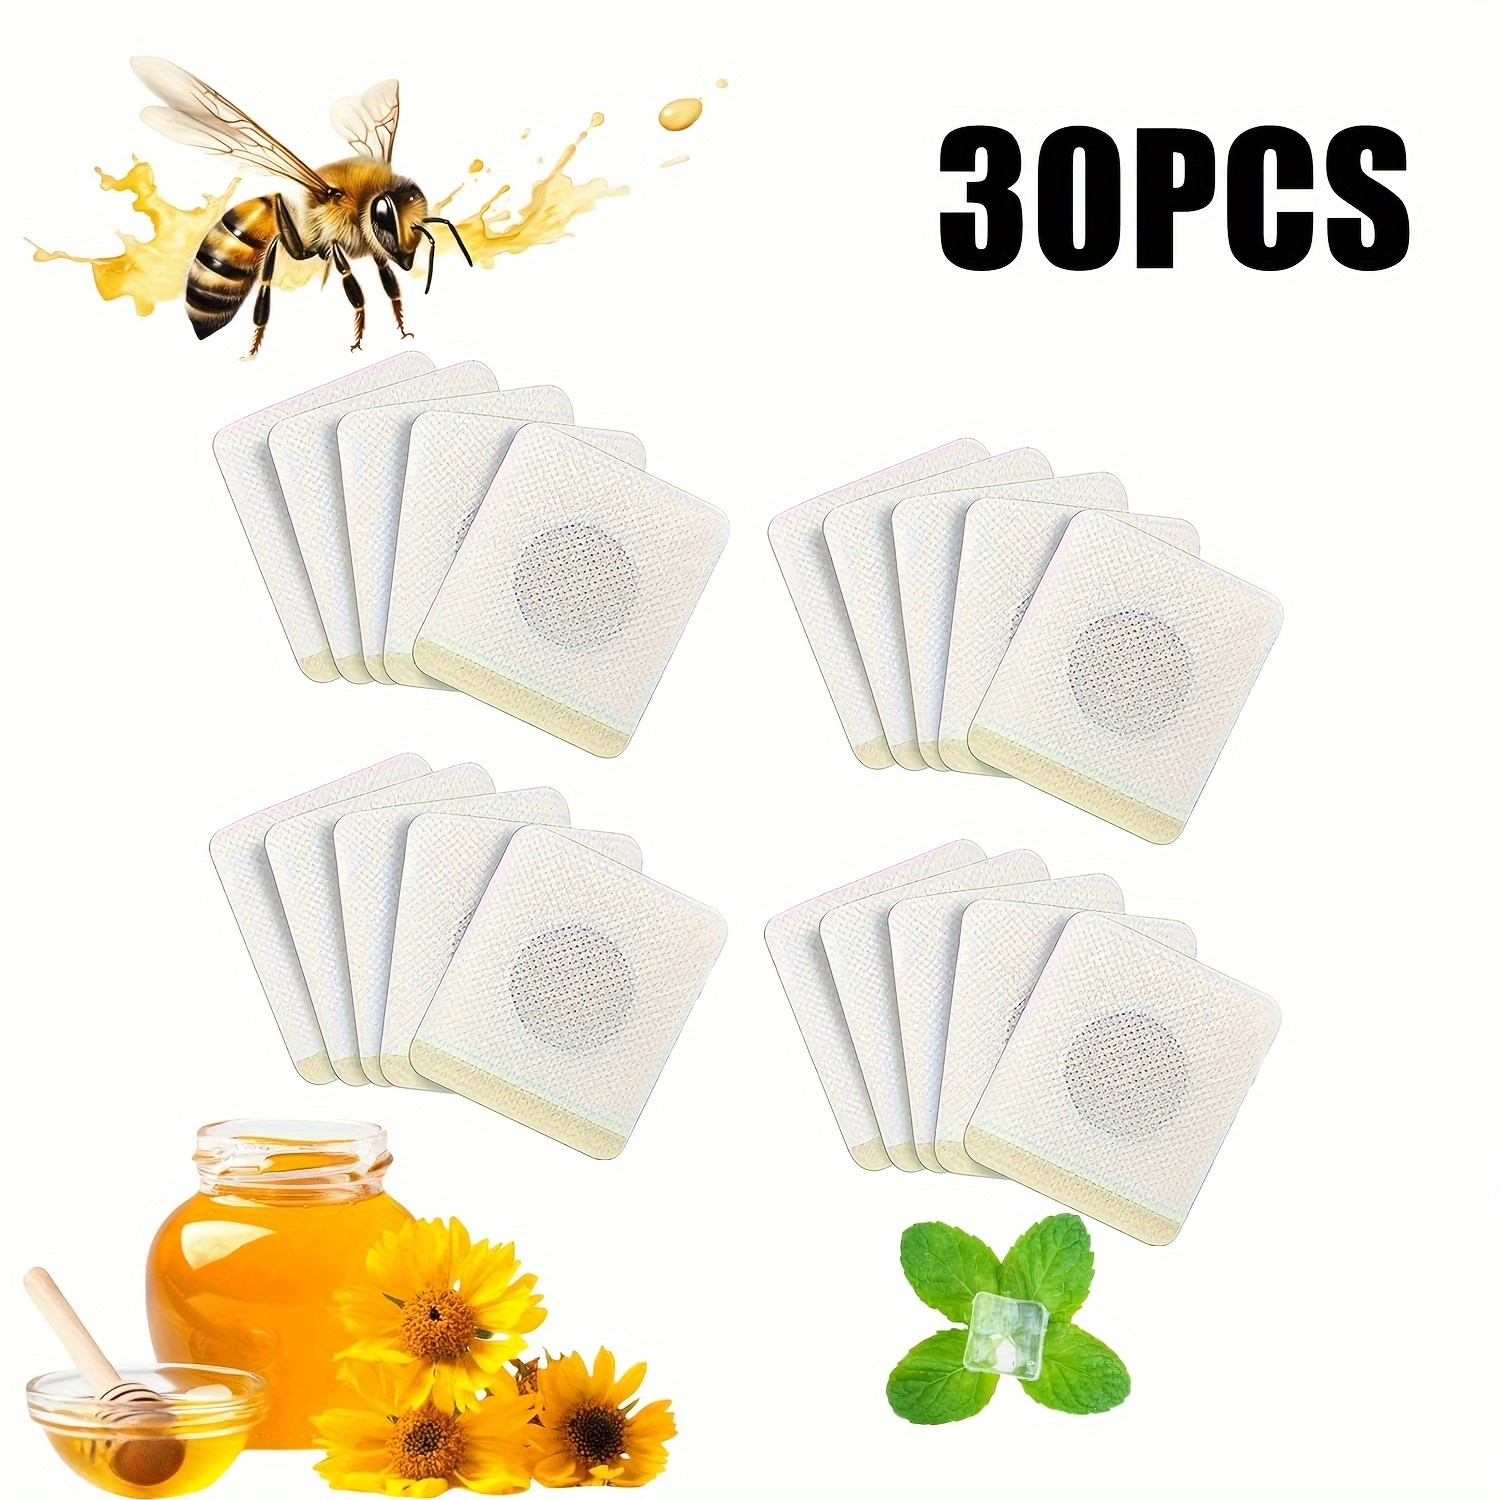 

30pcs Bubchen Bee Drainage Patches With And Calendula Extracts, Hypoallergenic Shaping And Belly Stickers, Natural Ingredients For Body Contouring And Wellness